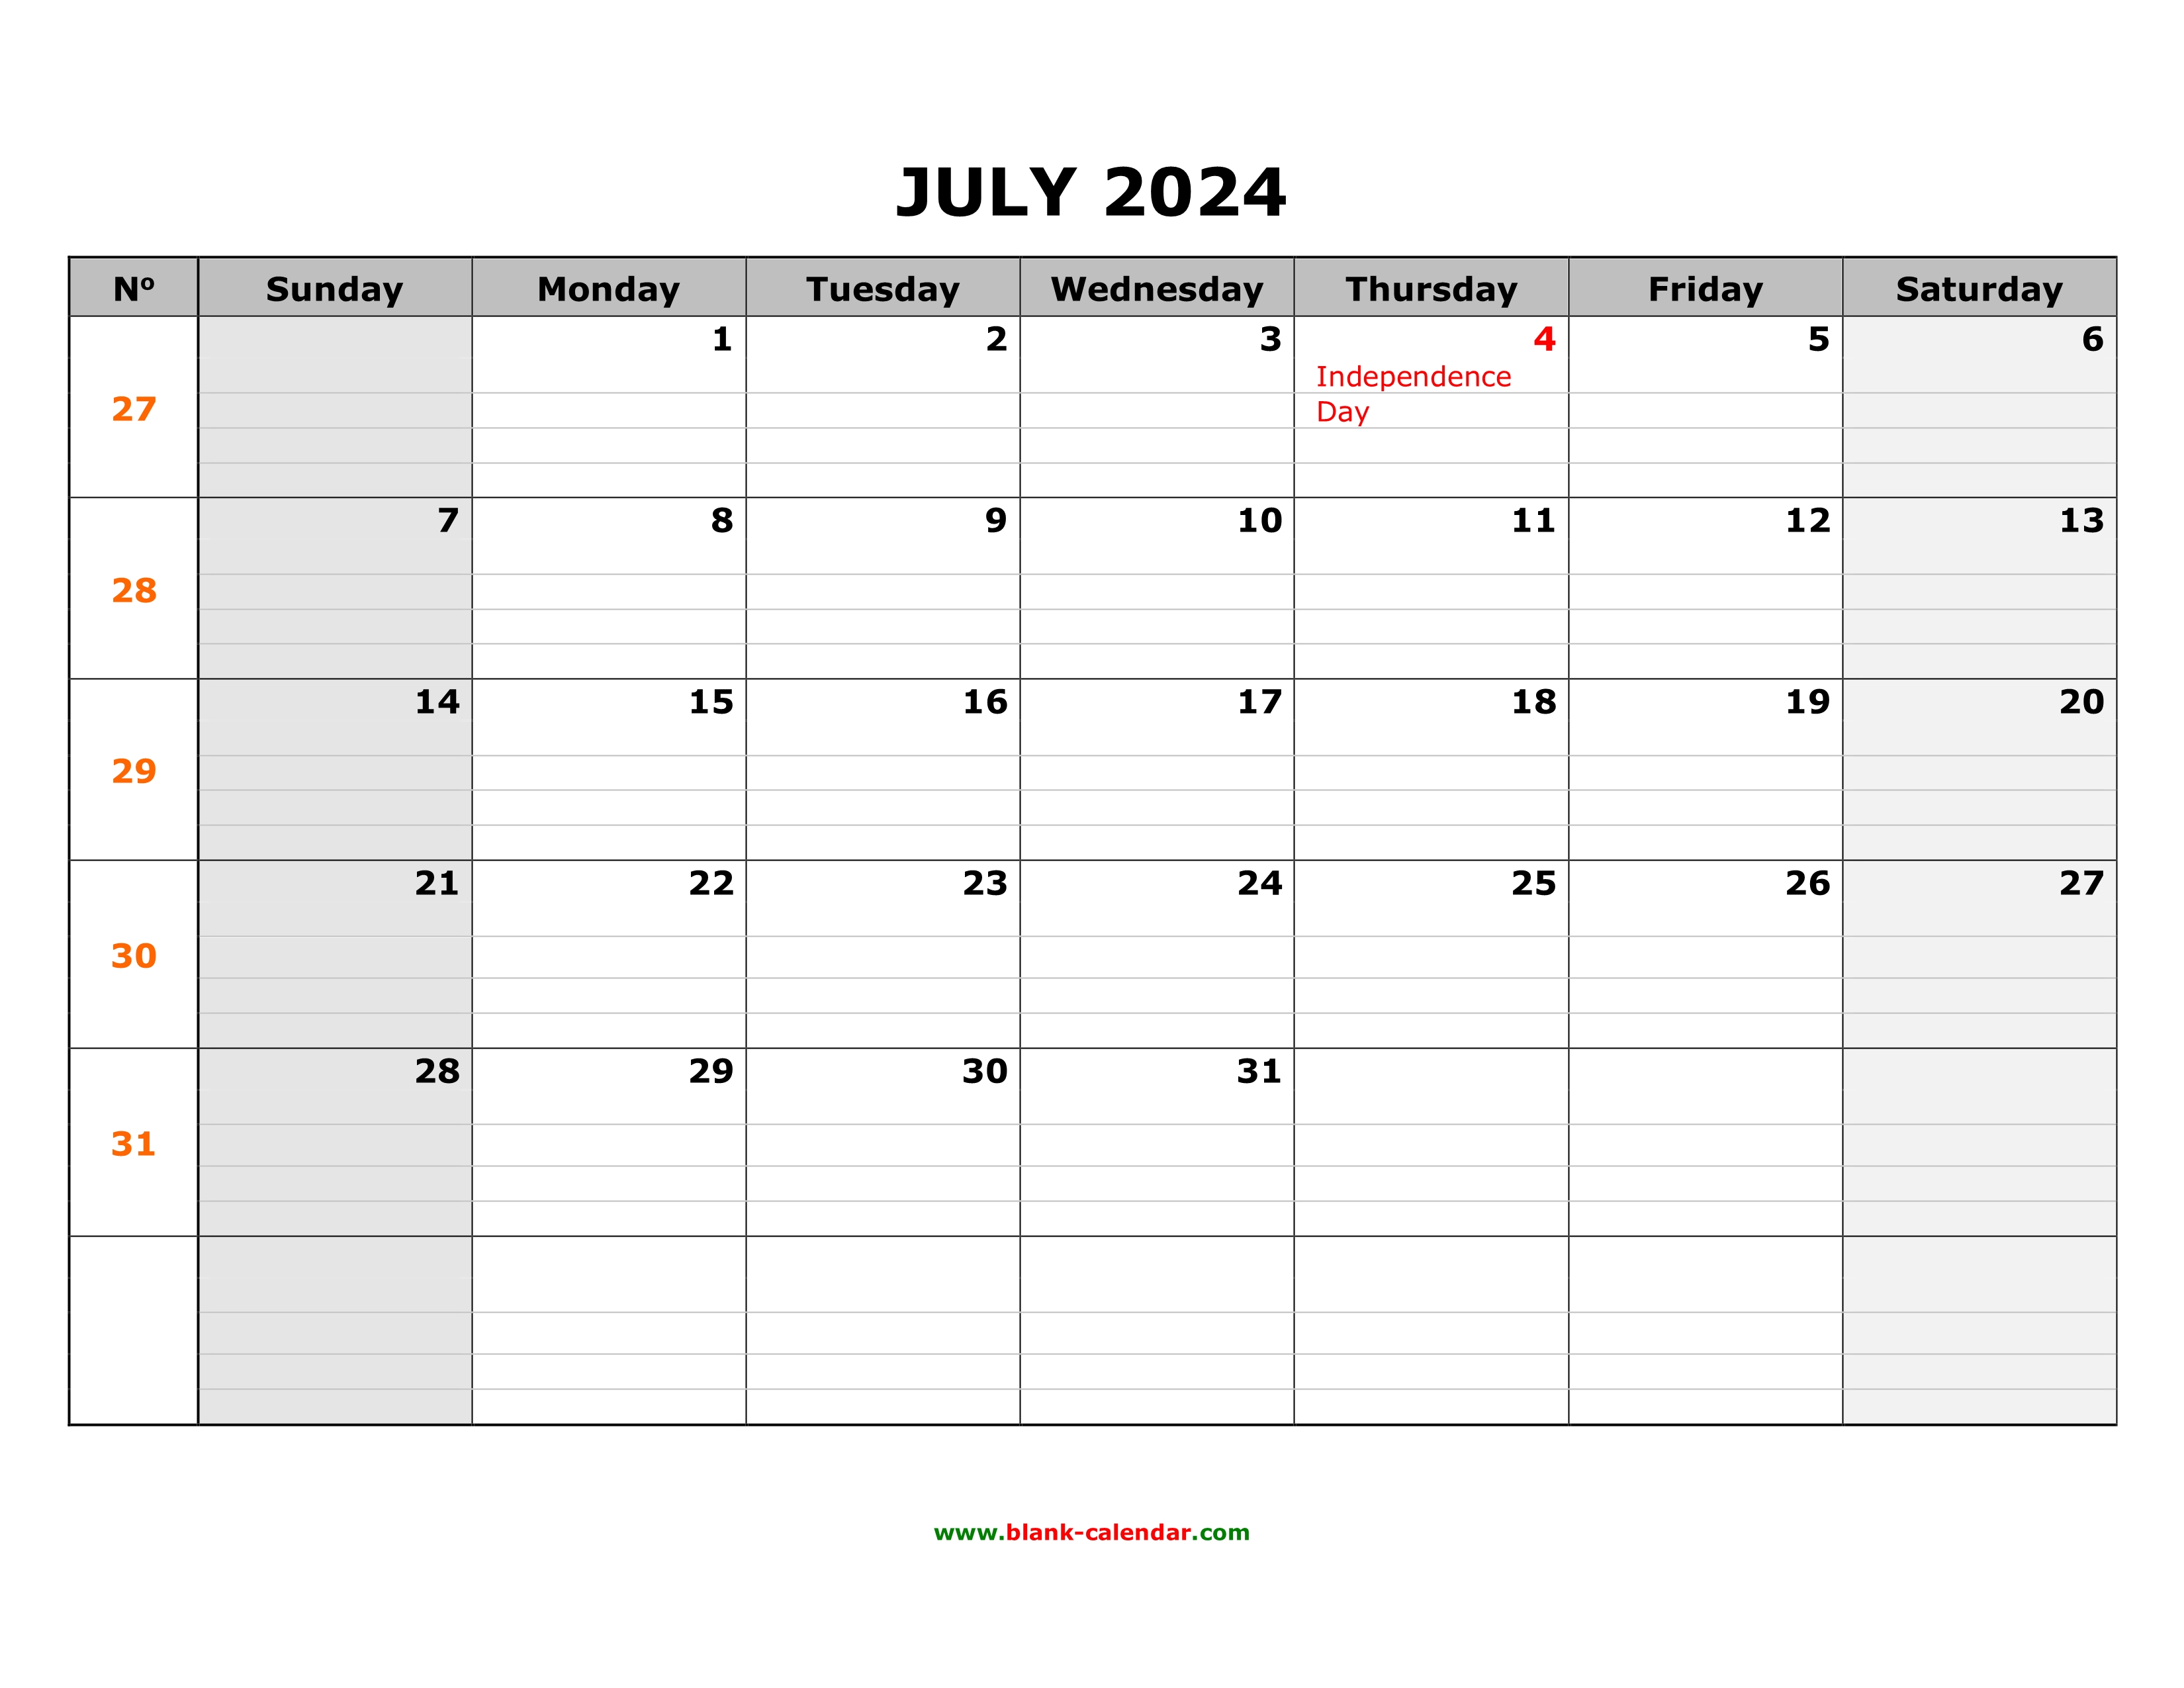 Free Download Printable July 2024 Calendar, large box grid, space for notes